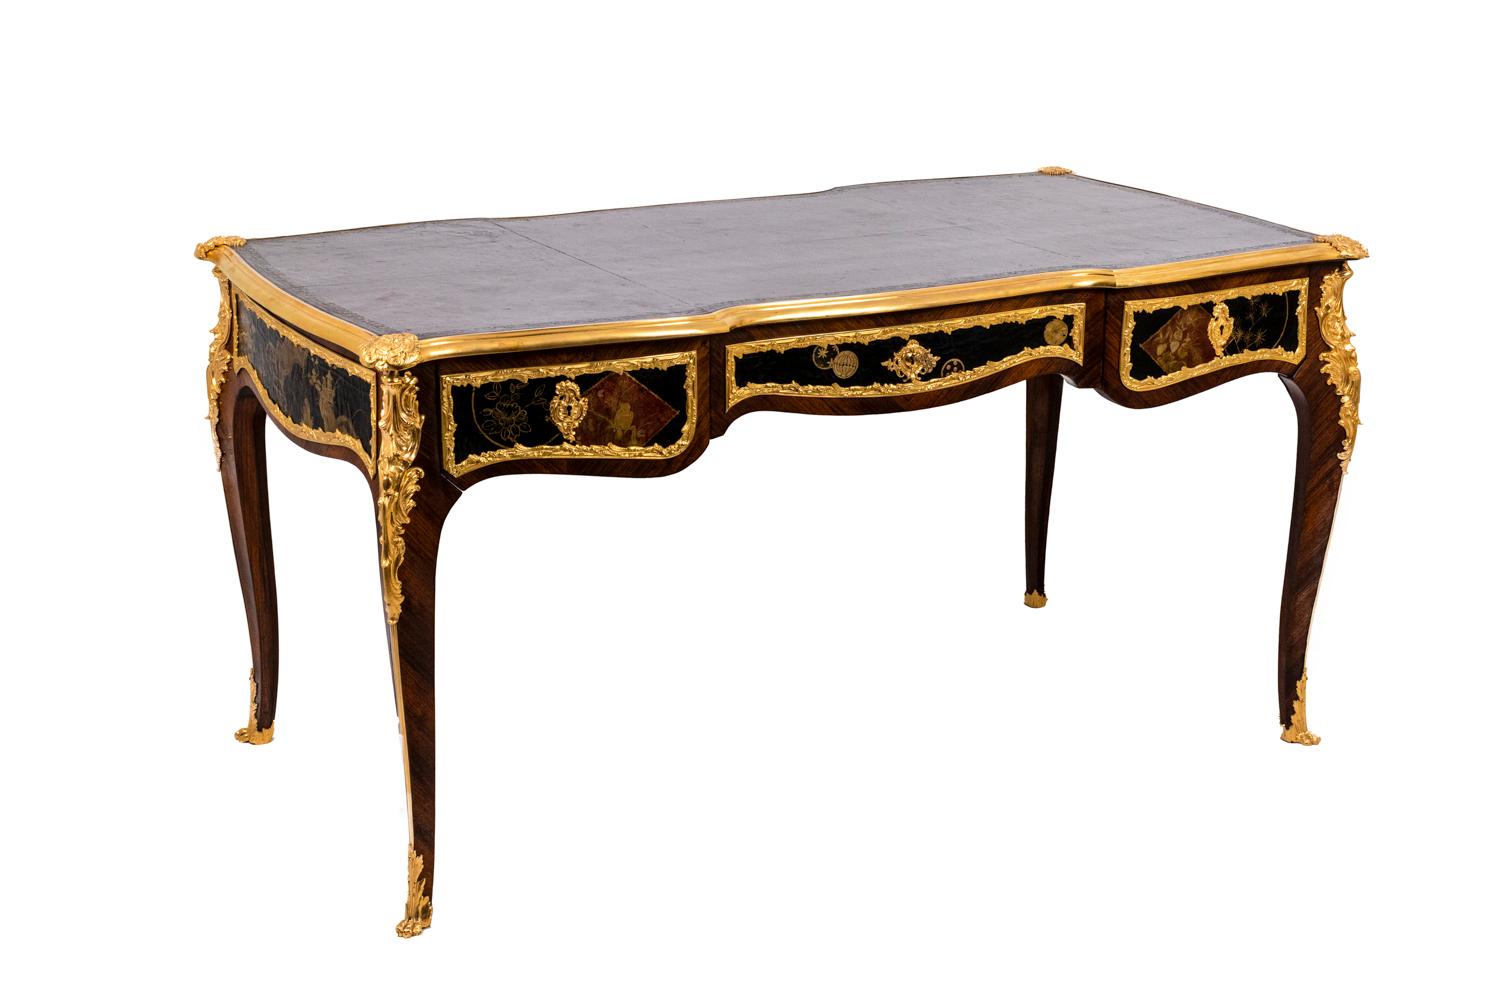 Flat desk of Louis XV style in rosewood veneer and chiseled and gilded bronze, opening with three drawers on the front. Tray covered with black leather morocco adorned with a frieze. Ornamentations adorned with shells and acanthus leaves. The belt